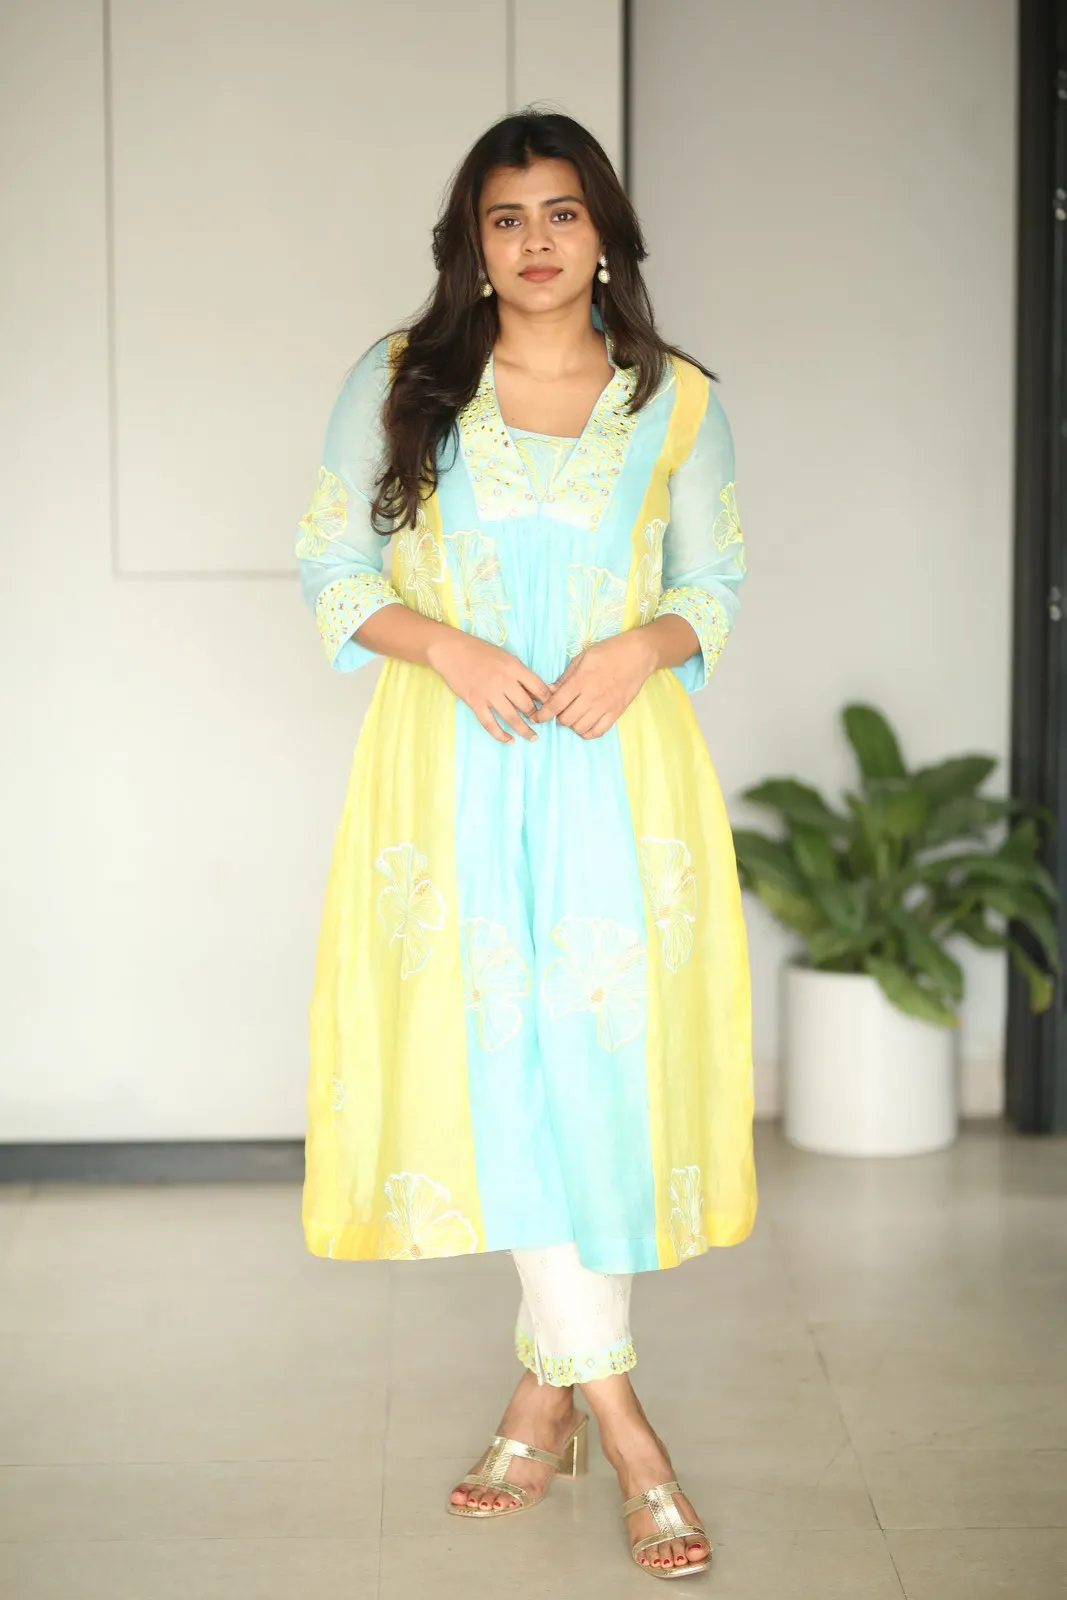 Tollywood Actress Hebah Patel latest Photos in recent interview